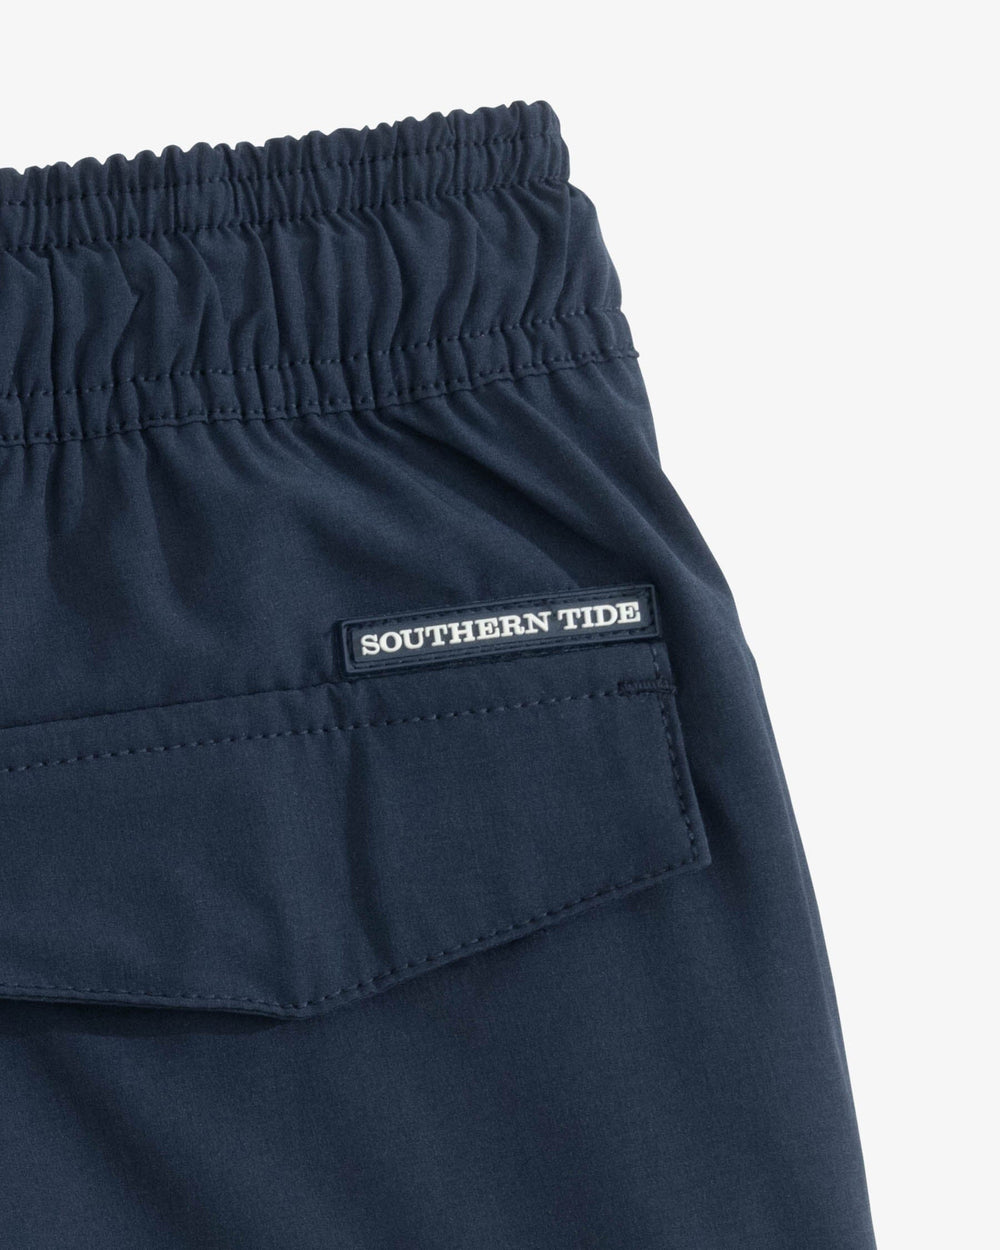 The detail view of the Southern Tide Boys Solid Swim Truck 2 0 by Southern Tide - True Navy